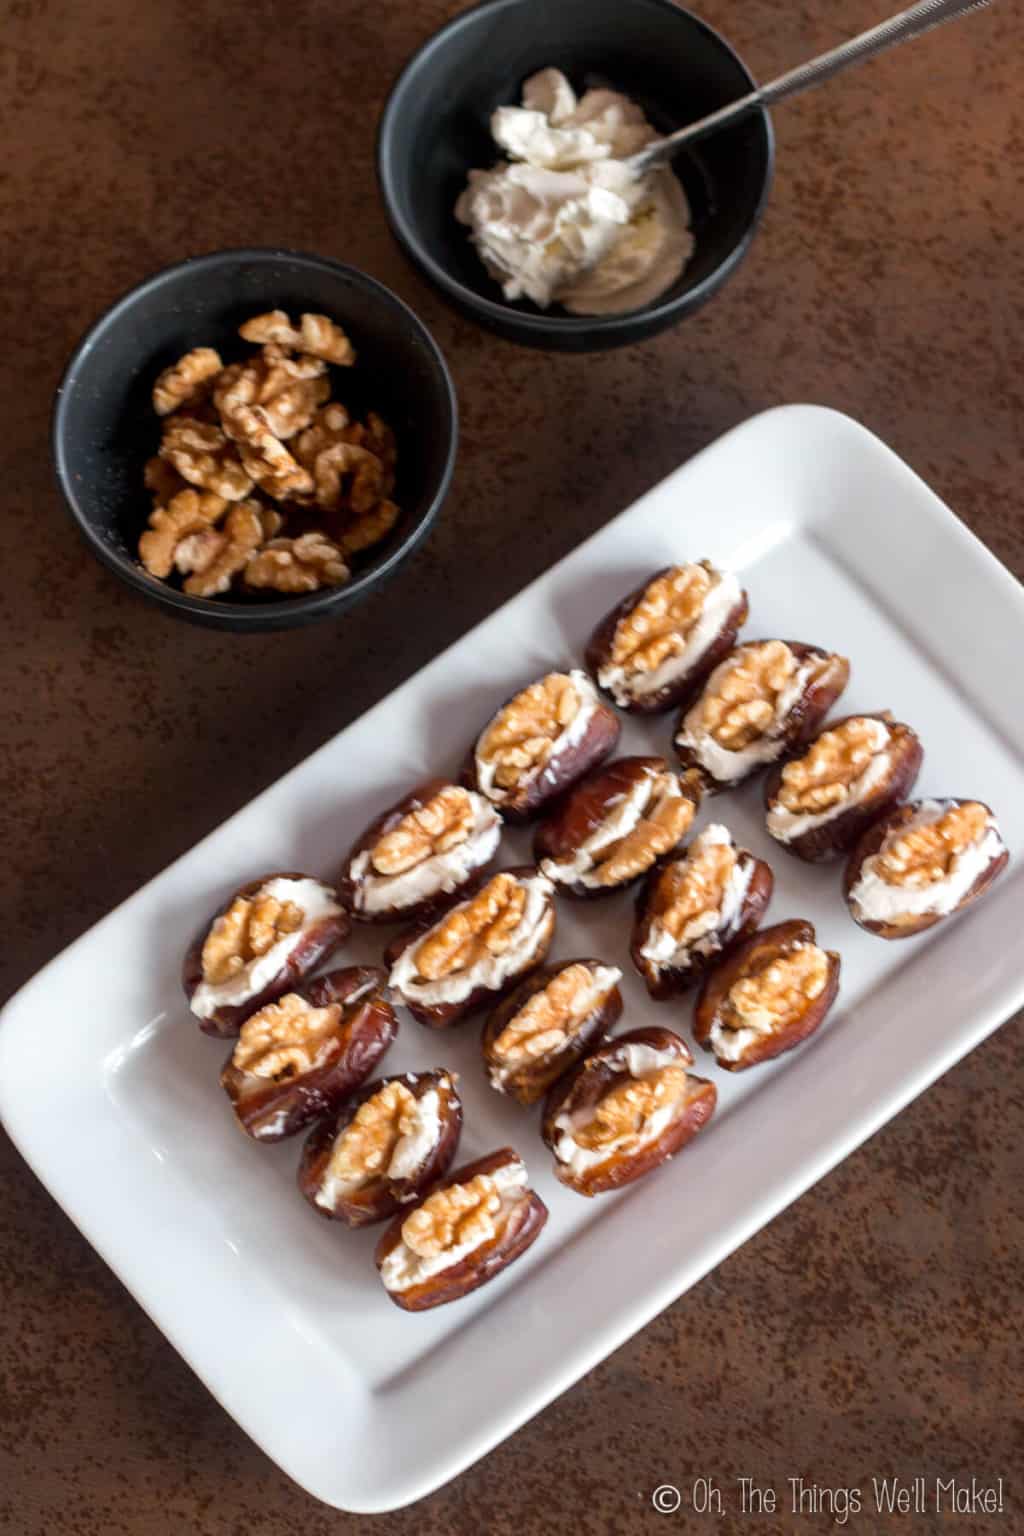 Overhead view of a rectangular plate with sixteen dates laid out. Dates are cut open in the middl, and filled with cream cheese and topped with walnuts. Behind the plate are two bowls, one filled with halved walnuts and another with cream cheese.